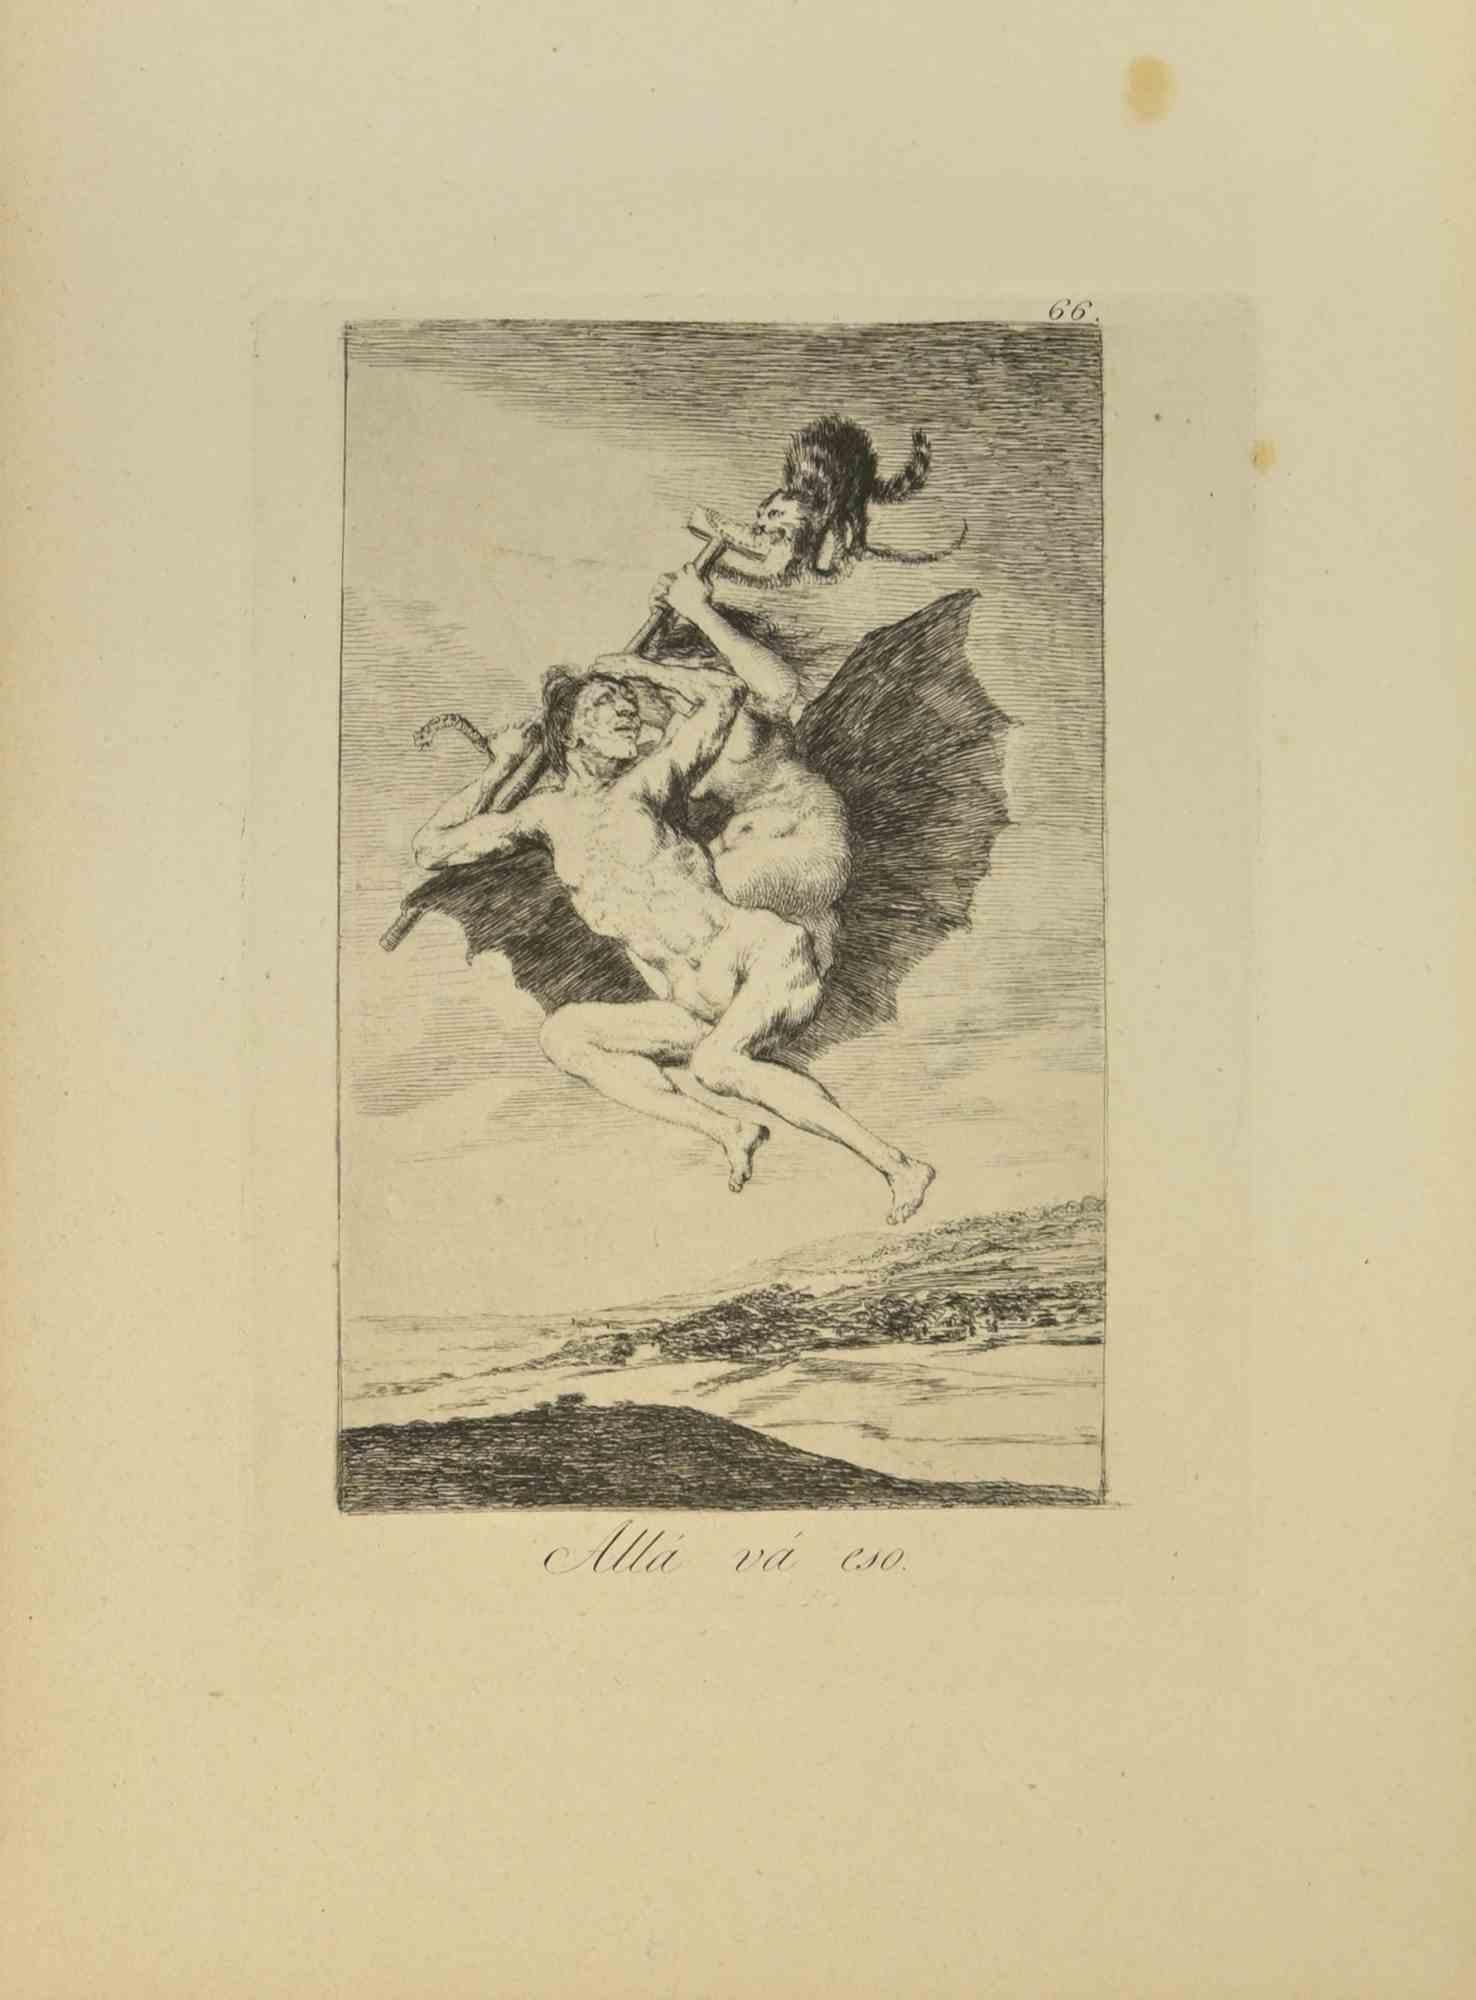 Allà và eso is an artwork realized by Francisco Goya in 1868.

Etching cm. 20.5x13.

No. 66 from Los Caprichos, Third Edition by Calcografia Cameral, 1868.

Ref. Delteil 103; Lafuente 66; Harris 101. 

Good condition.